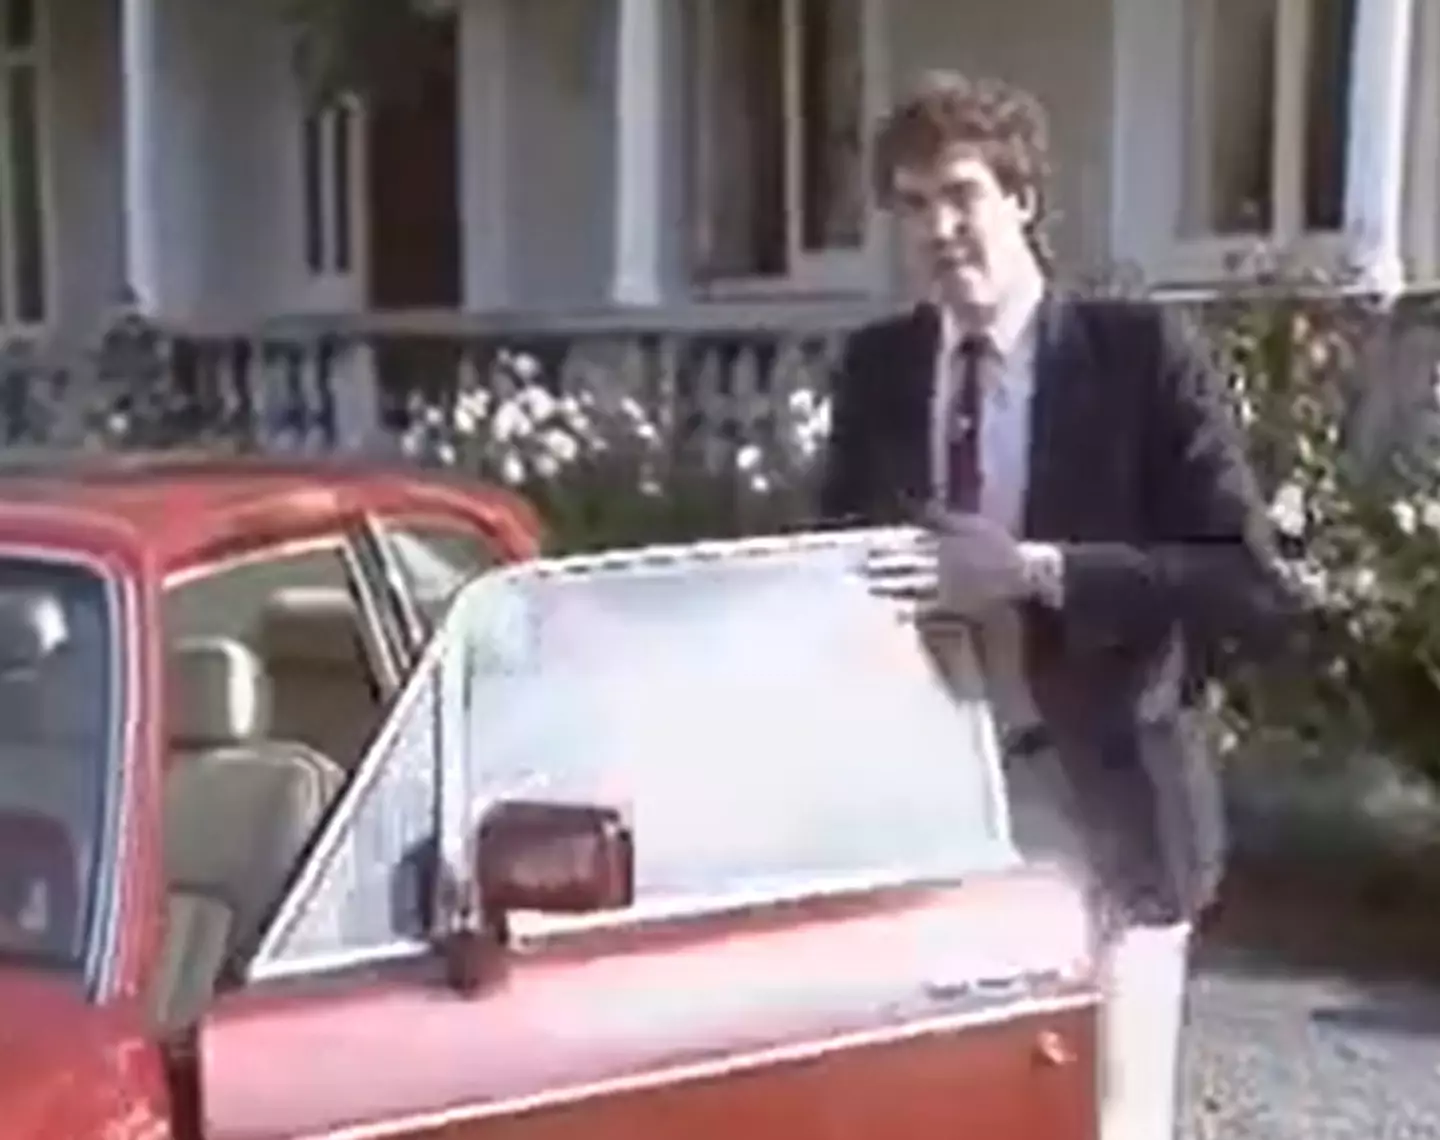 A younger Jeremy Clarkson in his first appearance on Top Gear. It's like he's speaking with someone else's voice.